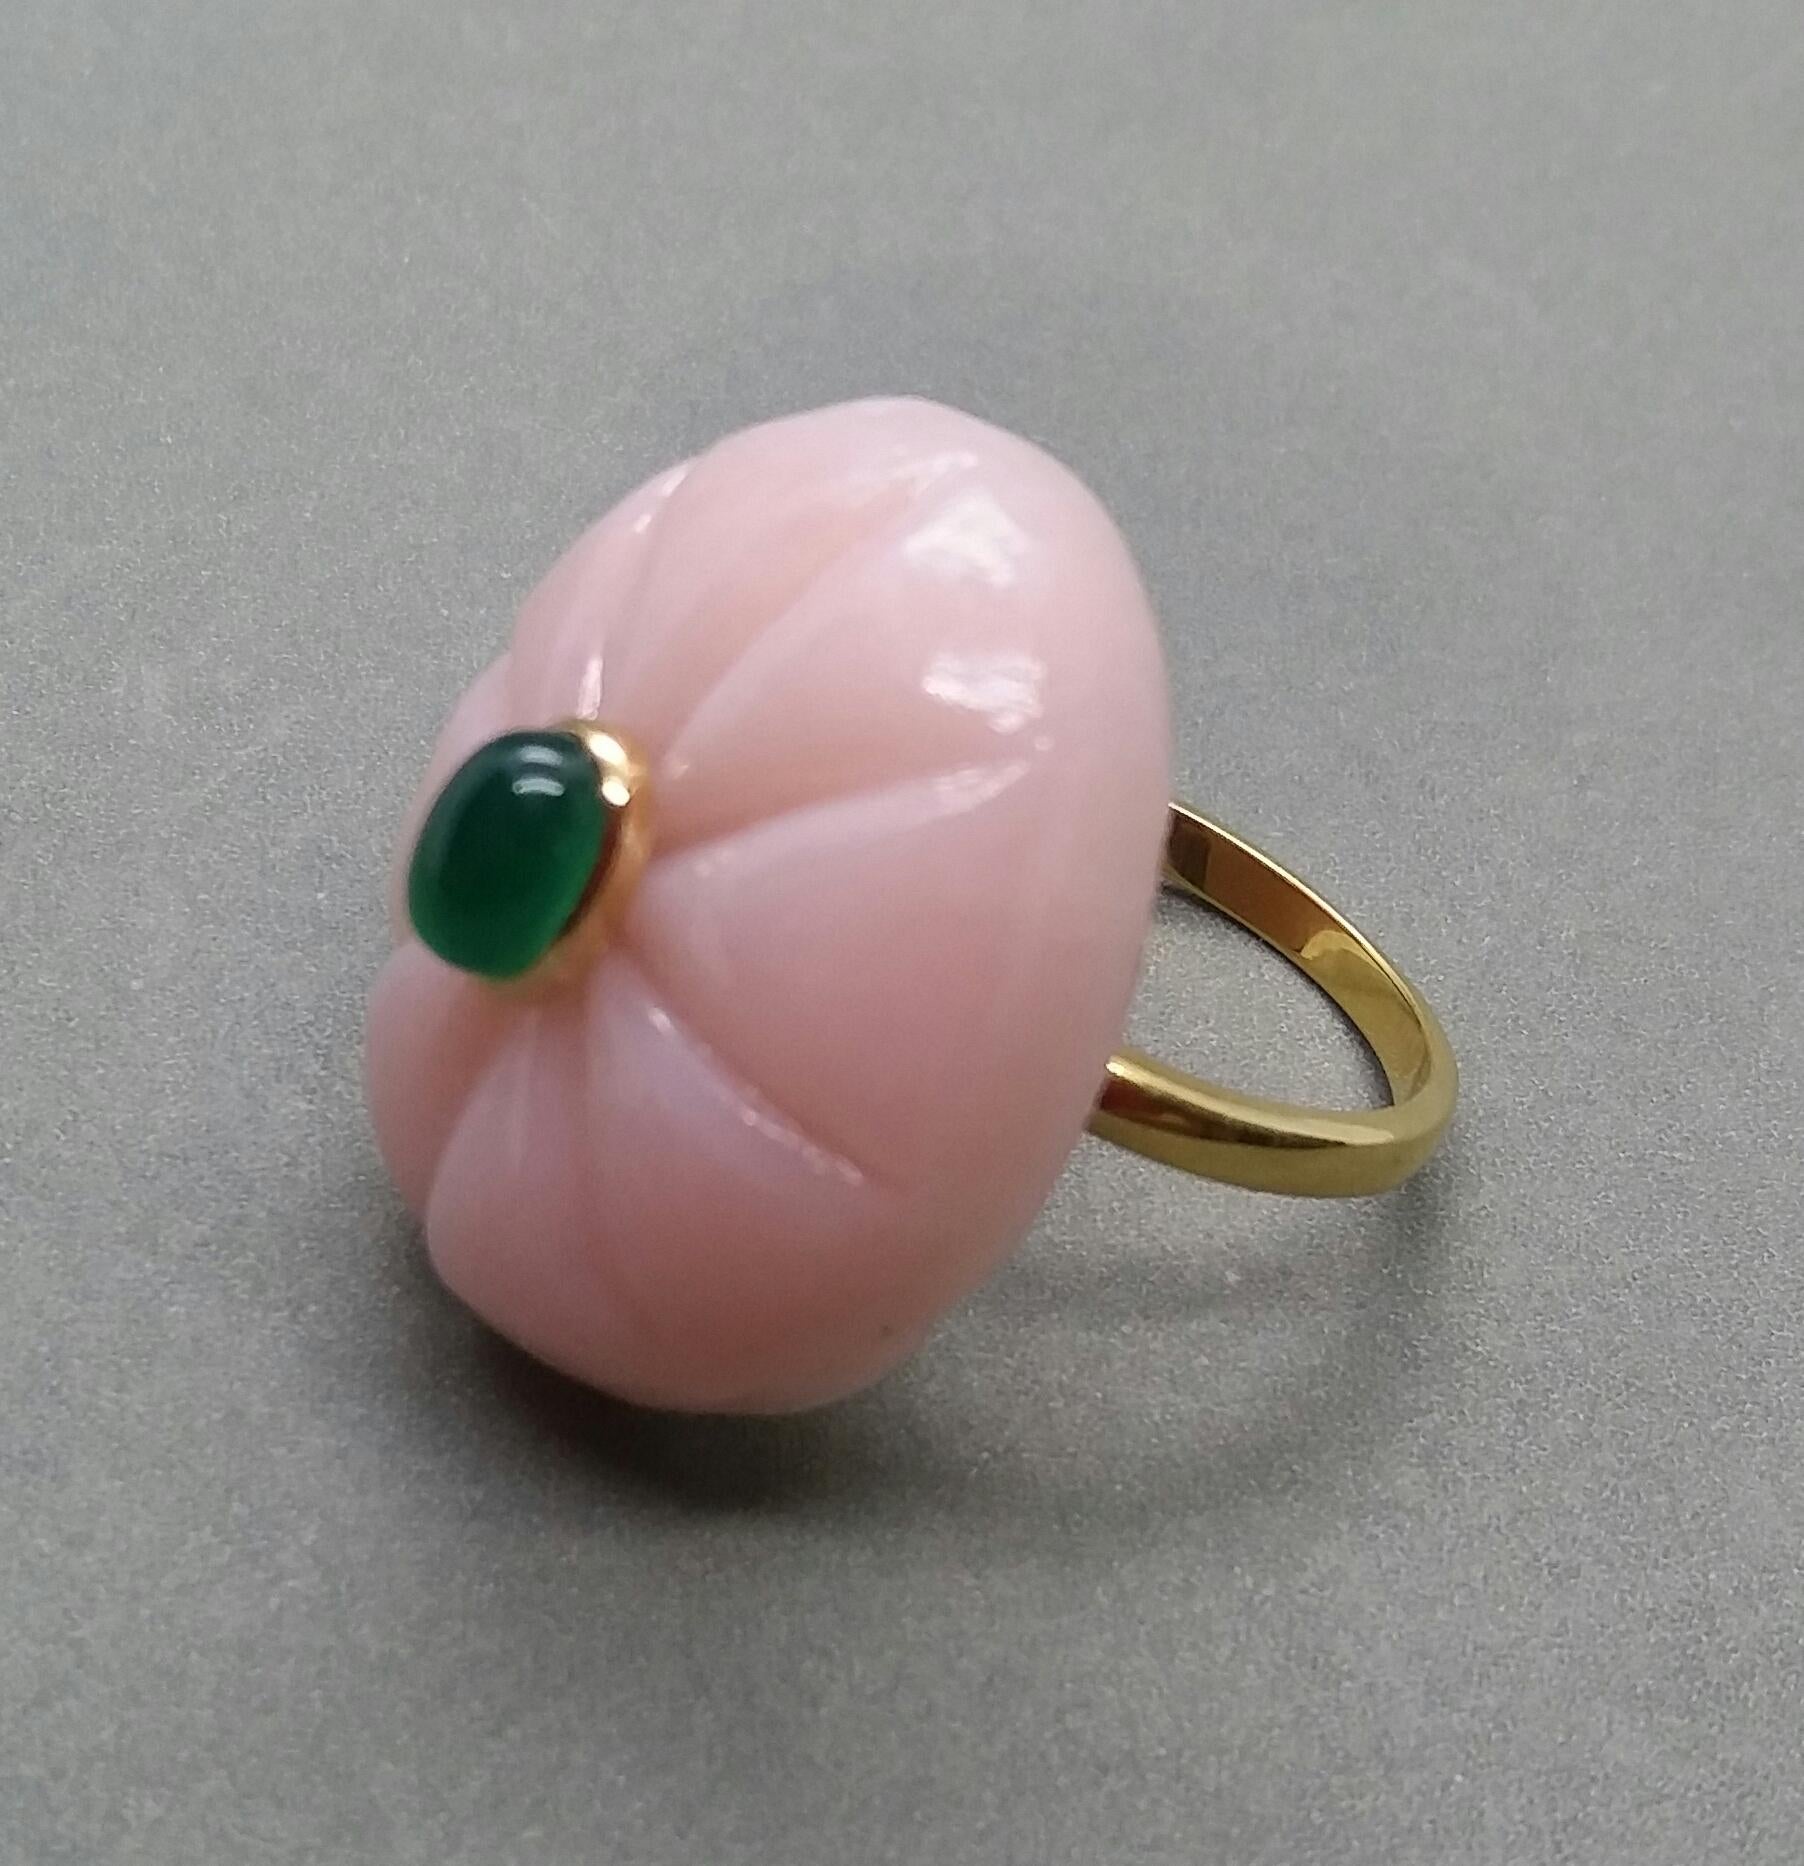 Unique ring with a big Engraved Oval Shape Pink Opal ,measuring 28 mm. x 24 mm x 8mm. and weighing 38 Carats with a nice Oval Emerald Cabochon measuring 6 mm x 8 mm set in 14 kt yellow gold...Ring shank is also in 14 kt  solid yellow gold now in